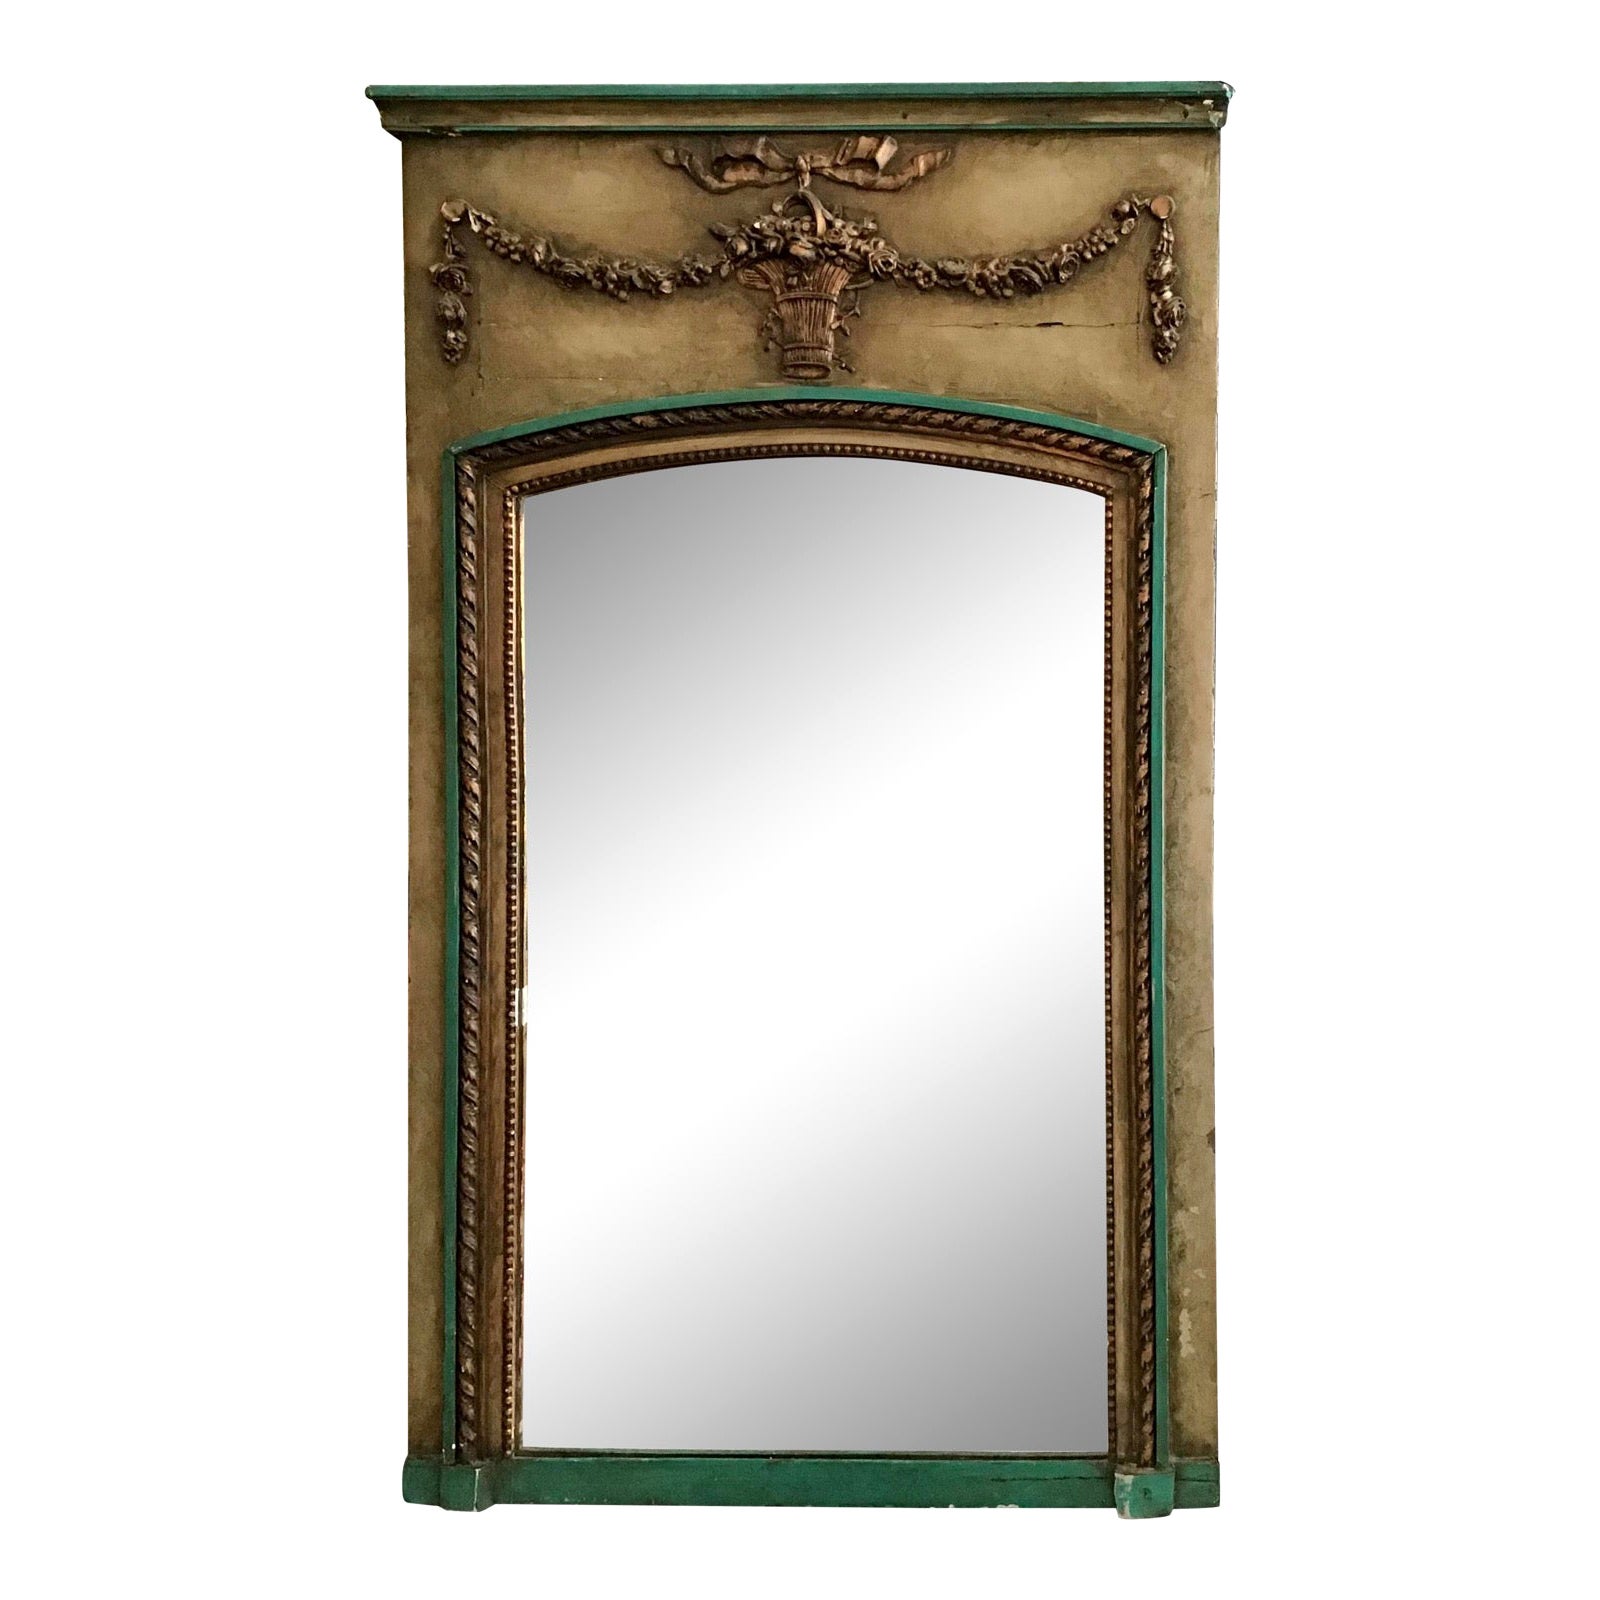 Small Classic French Boiserie Mirror in Original Painted Finish